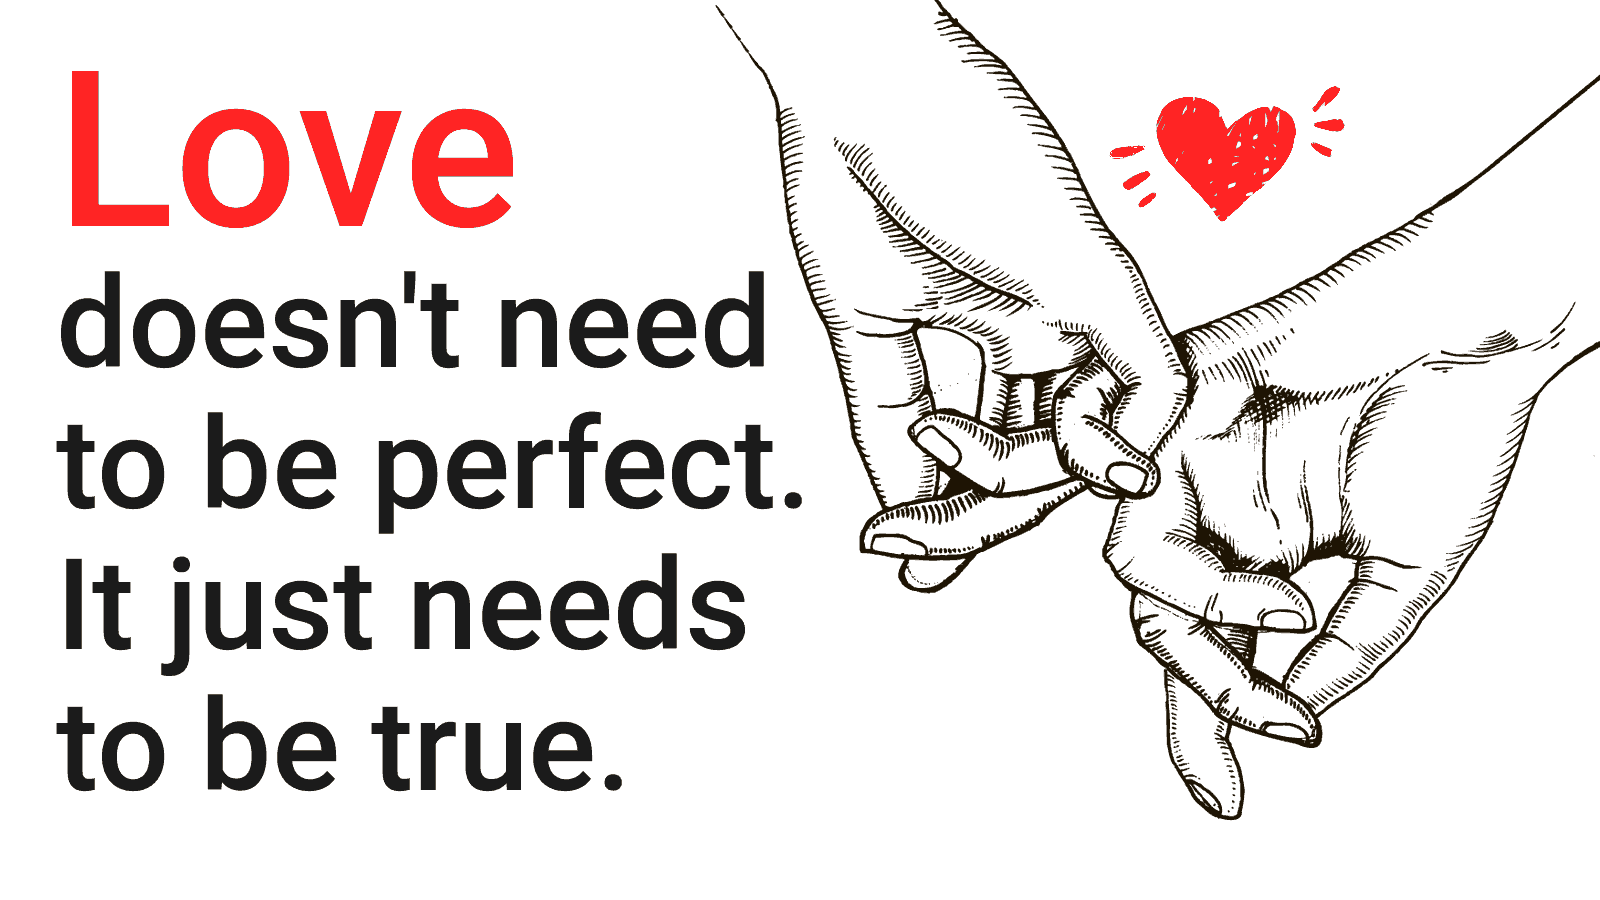 5 Rush Quotes About Love